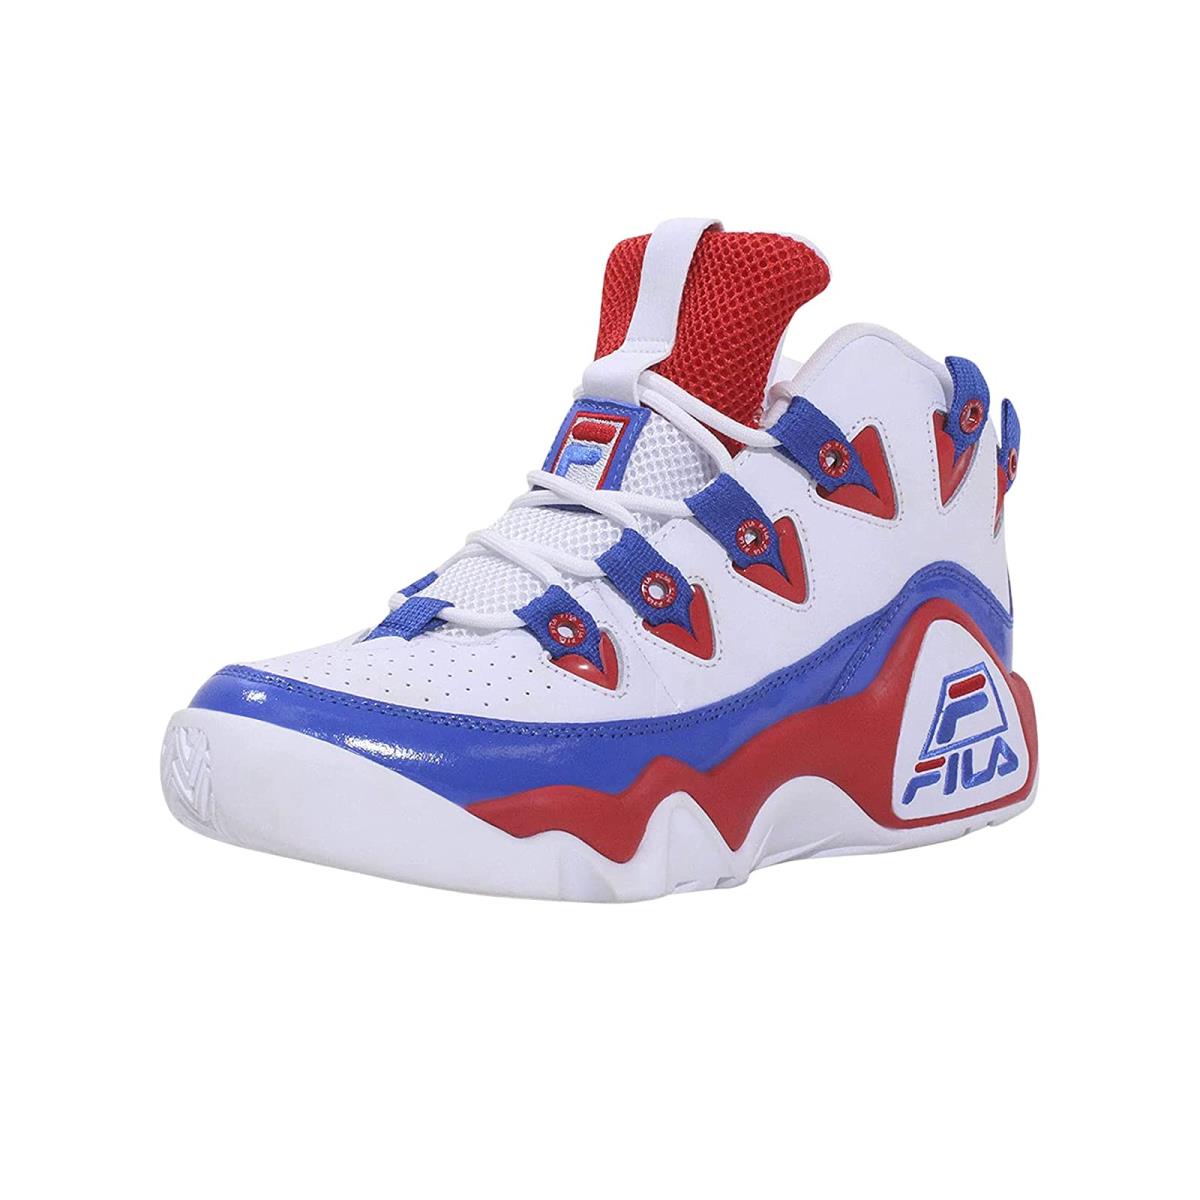 Man`s Sneakers Athletic Shoes Fila Grant Hill 1 White/Fila Red/Prince Blue